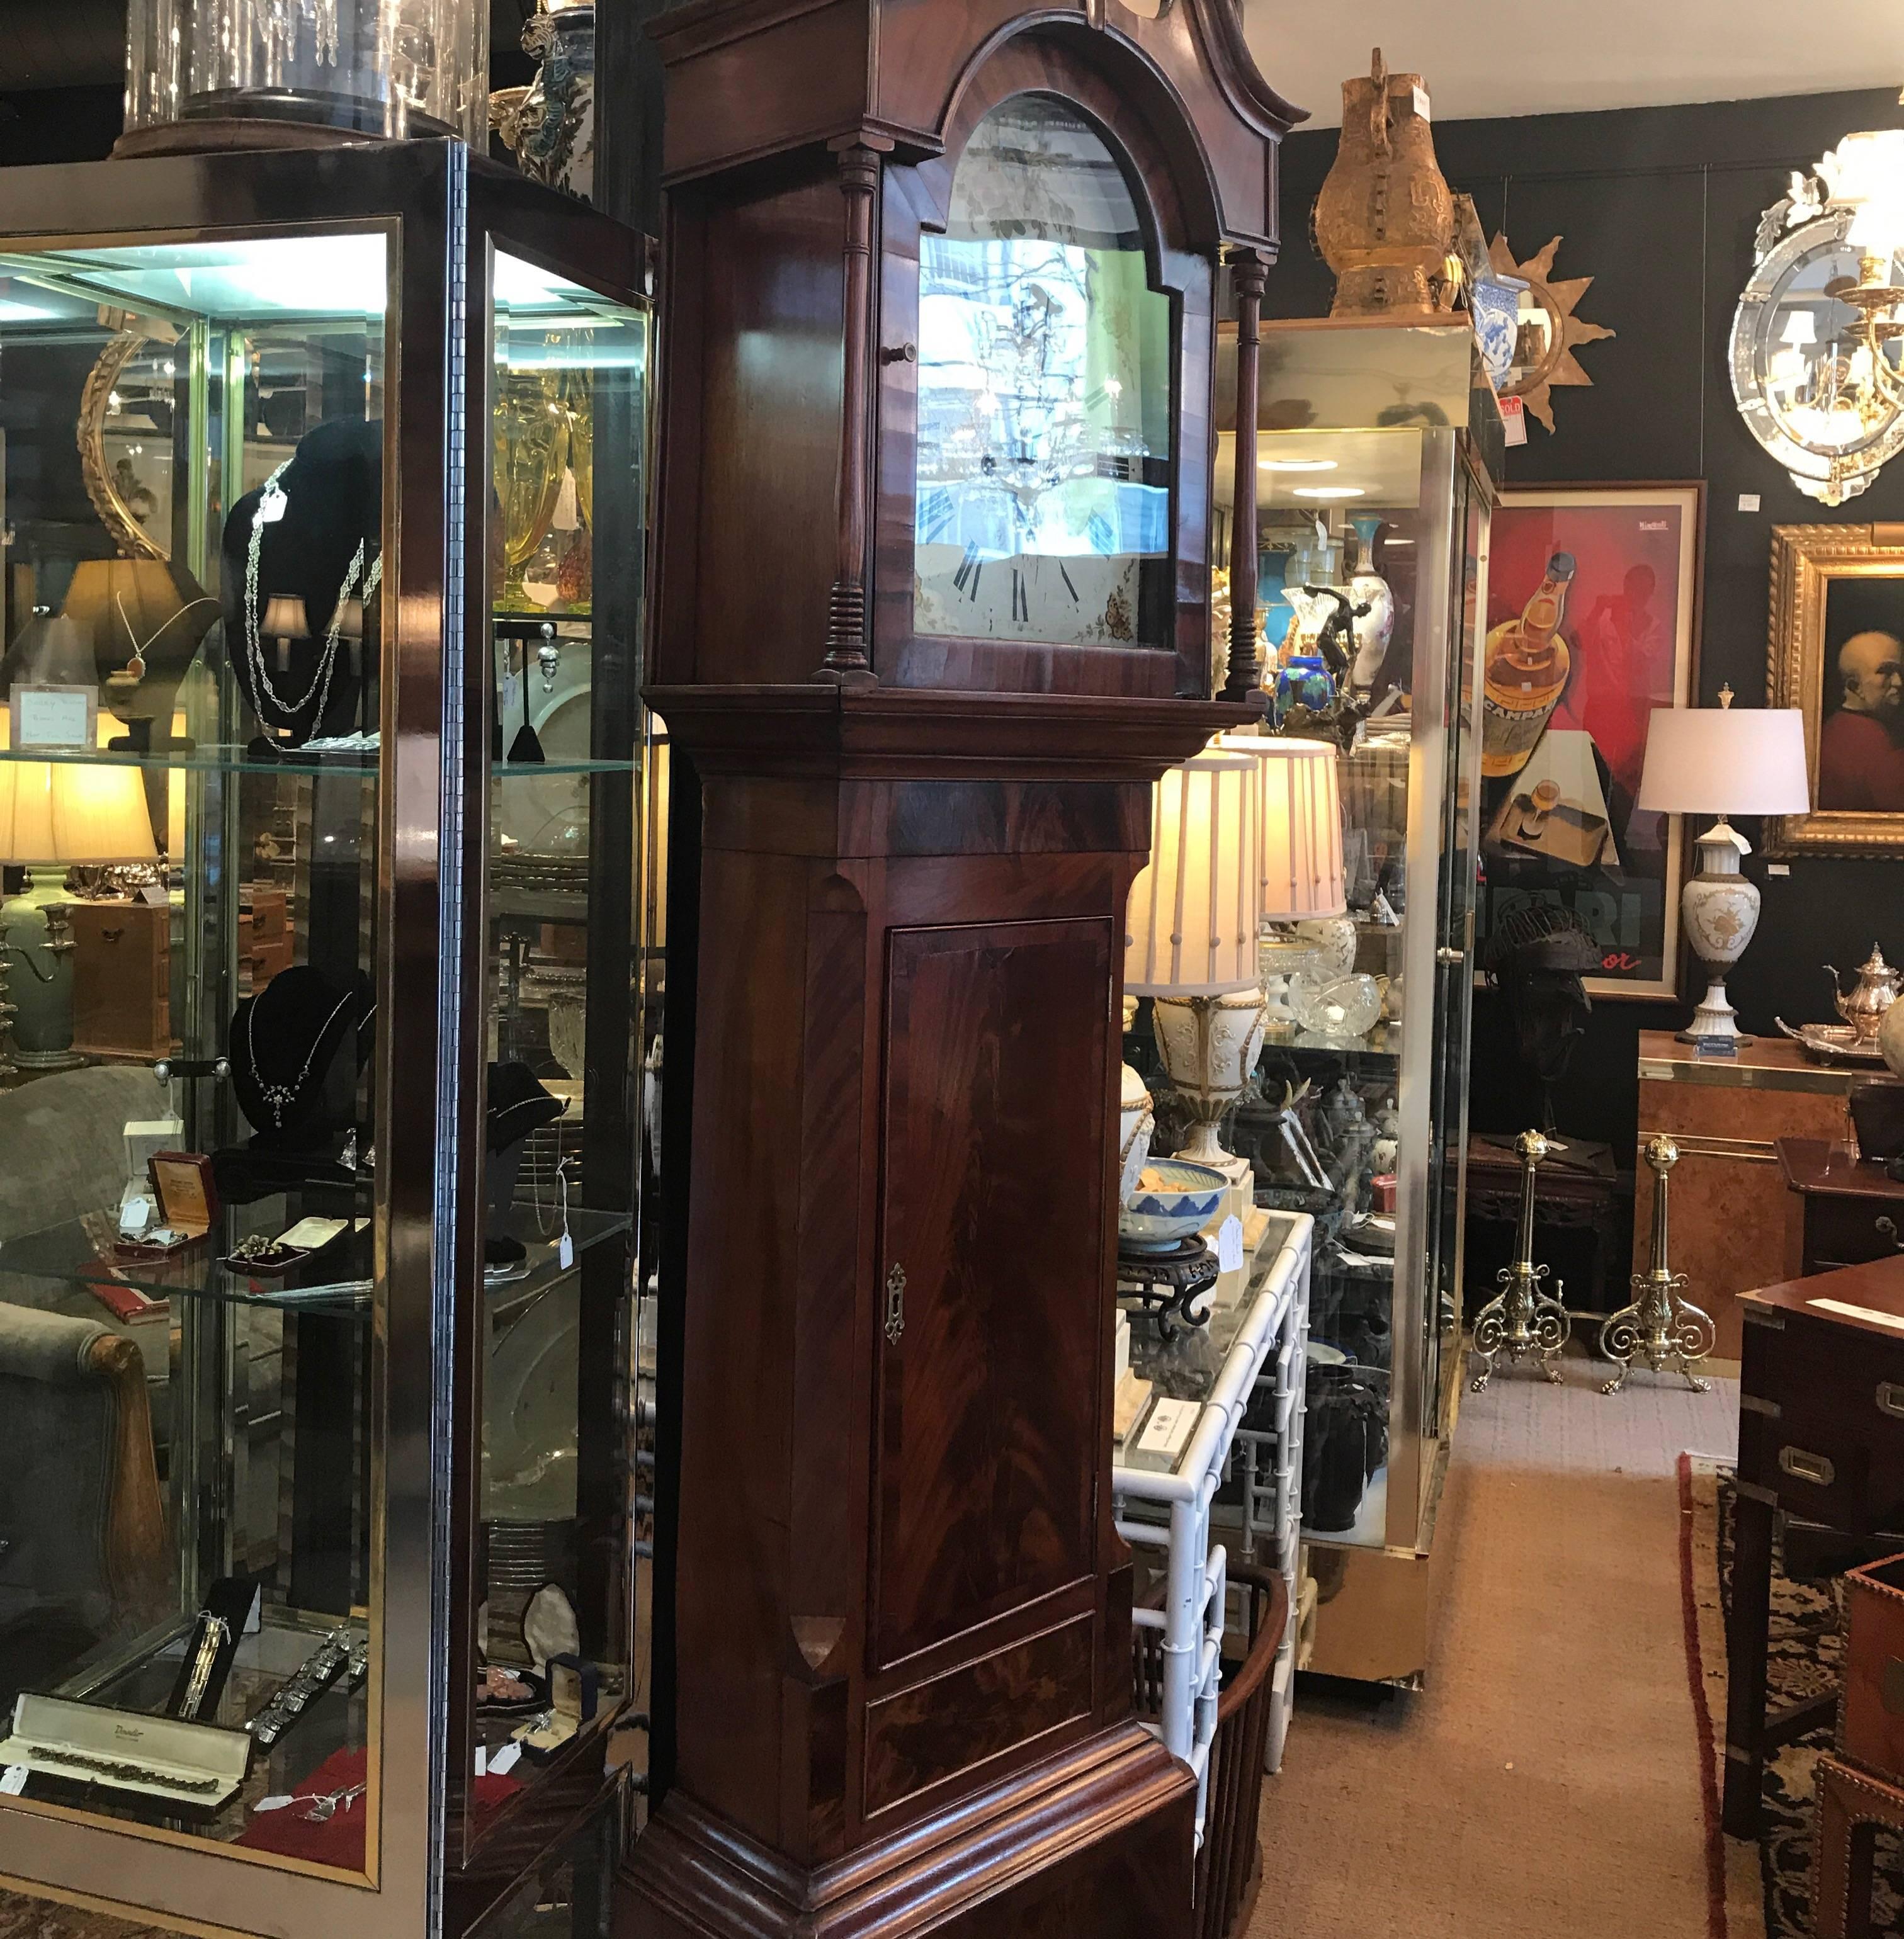 A George III mahogany tall case clock circa 1810-1820, signed John Blaylock. Blaylock came from three generations of clock makers. The case features a swans neck pediment over an arched glazed door flanked by turned columns opening to a white